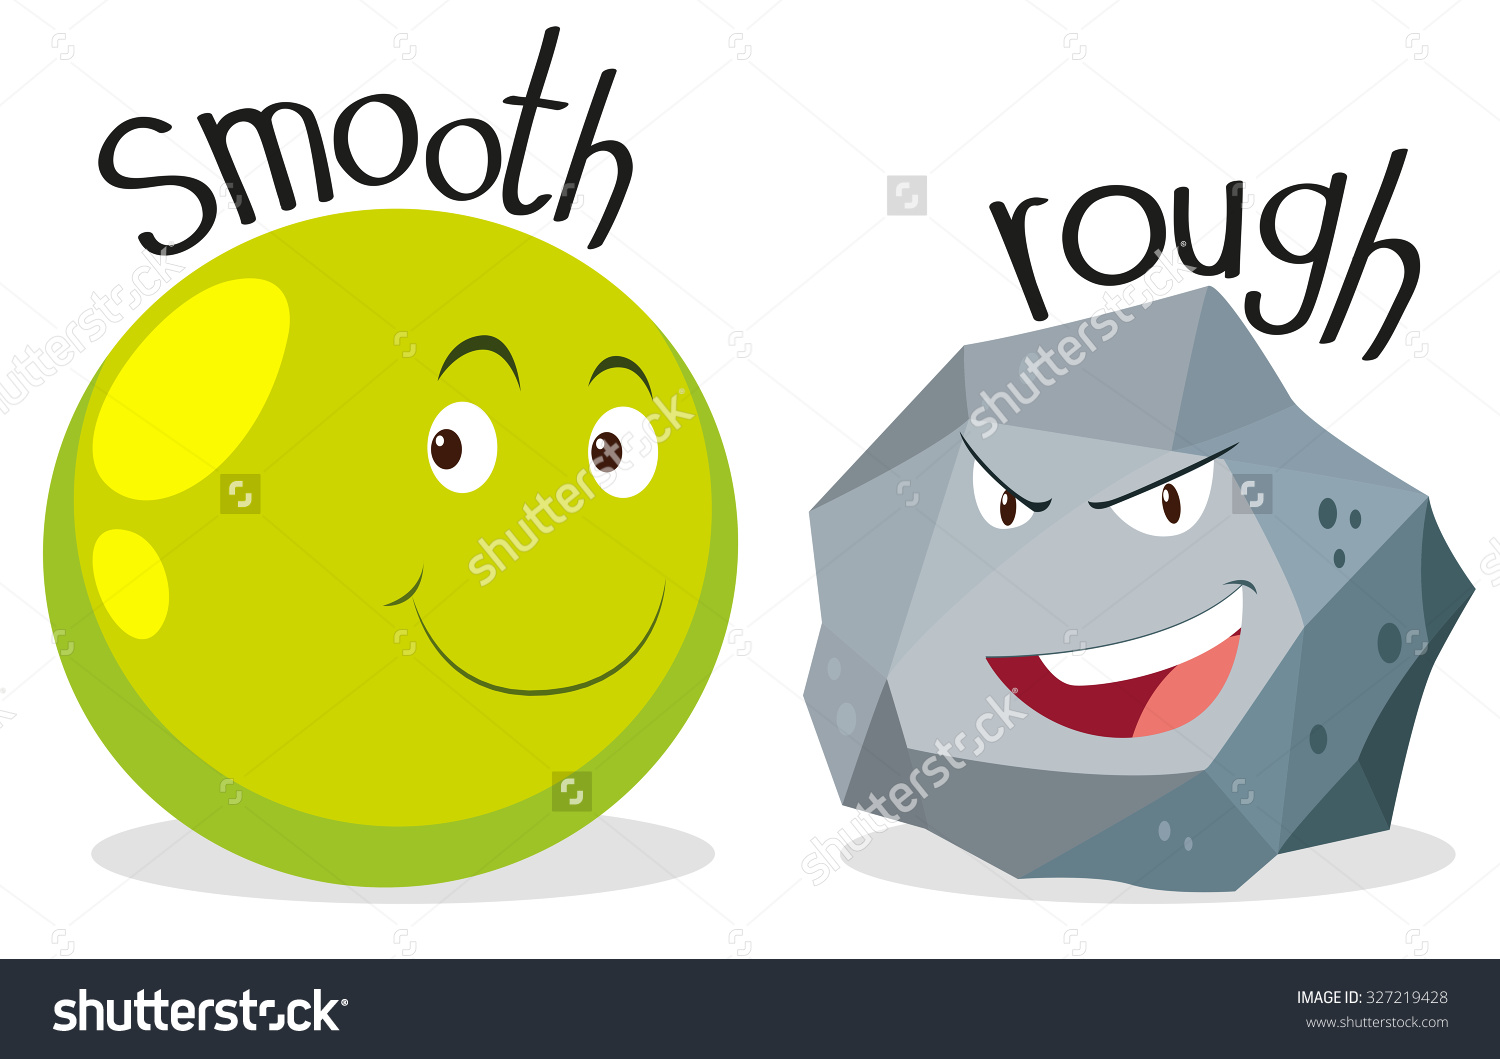 Smooth clipart #16, Download drawings